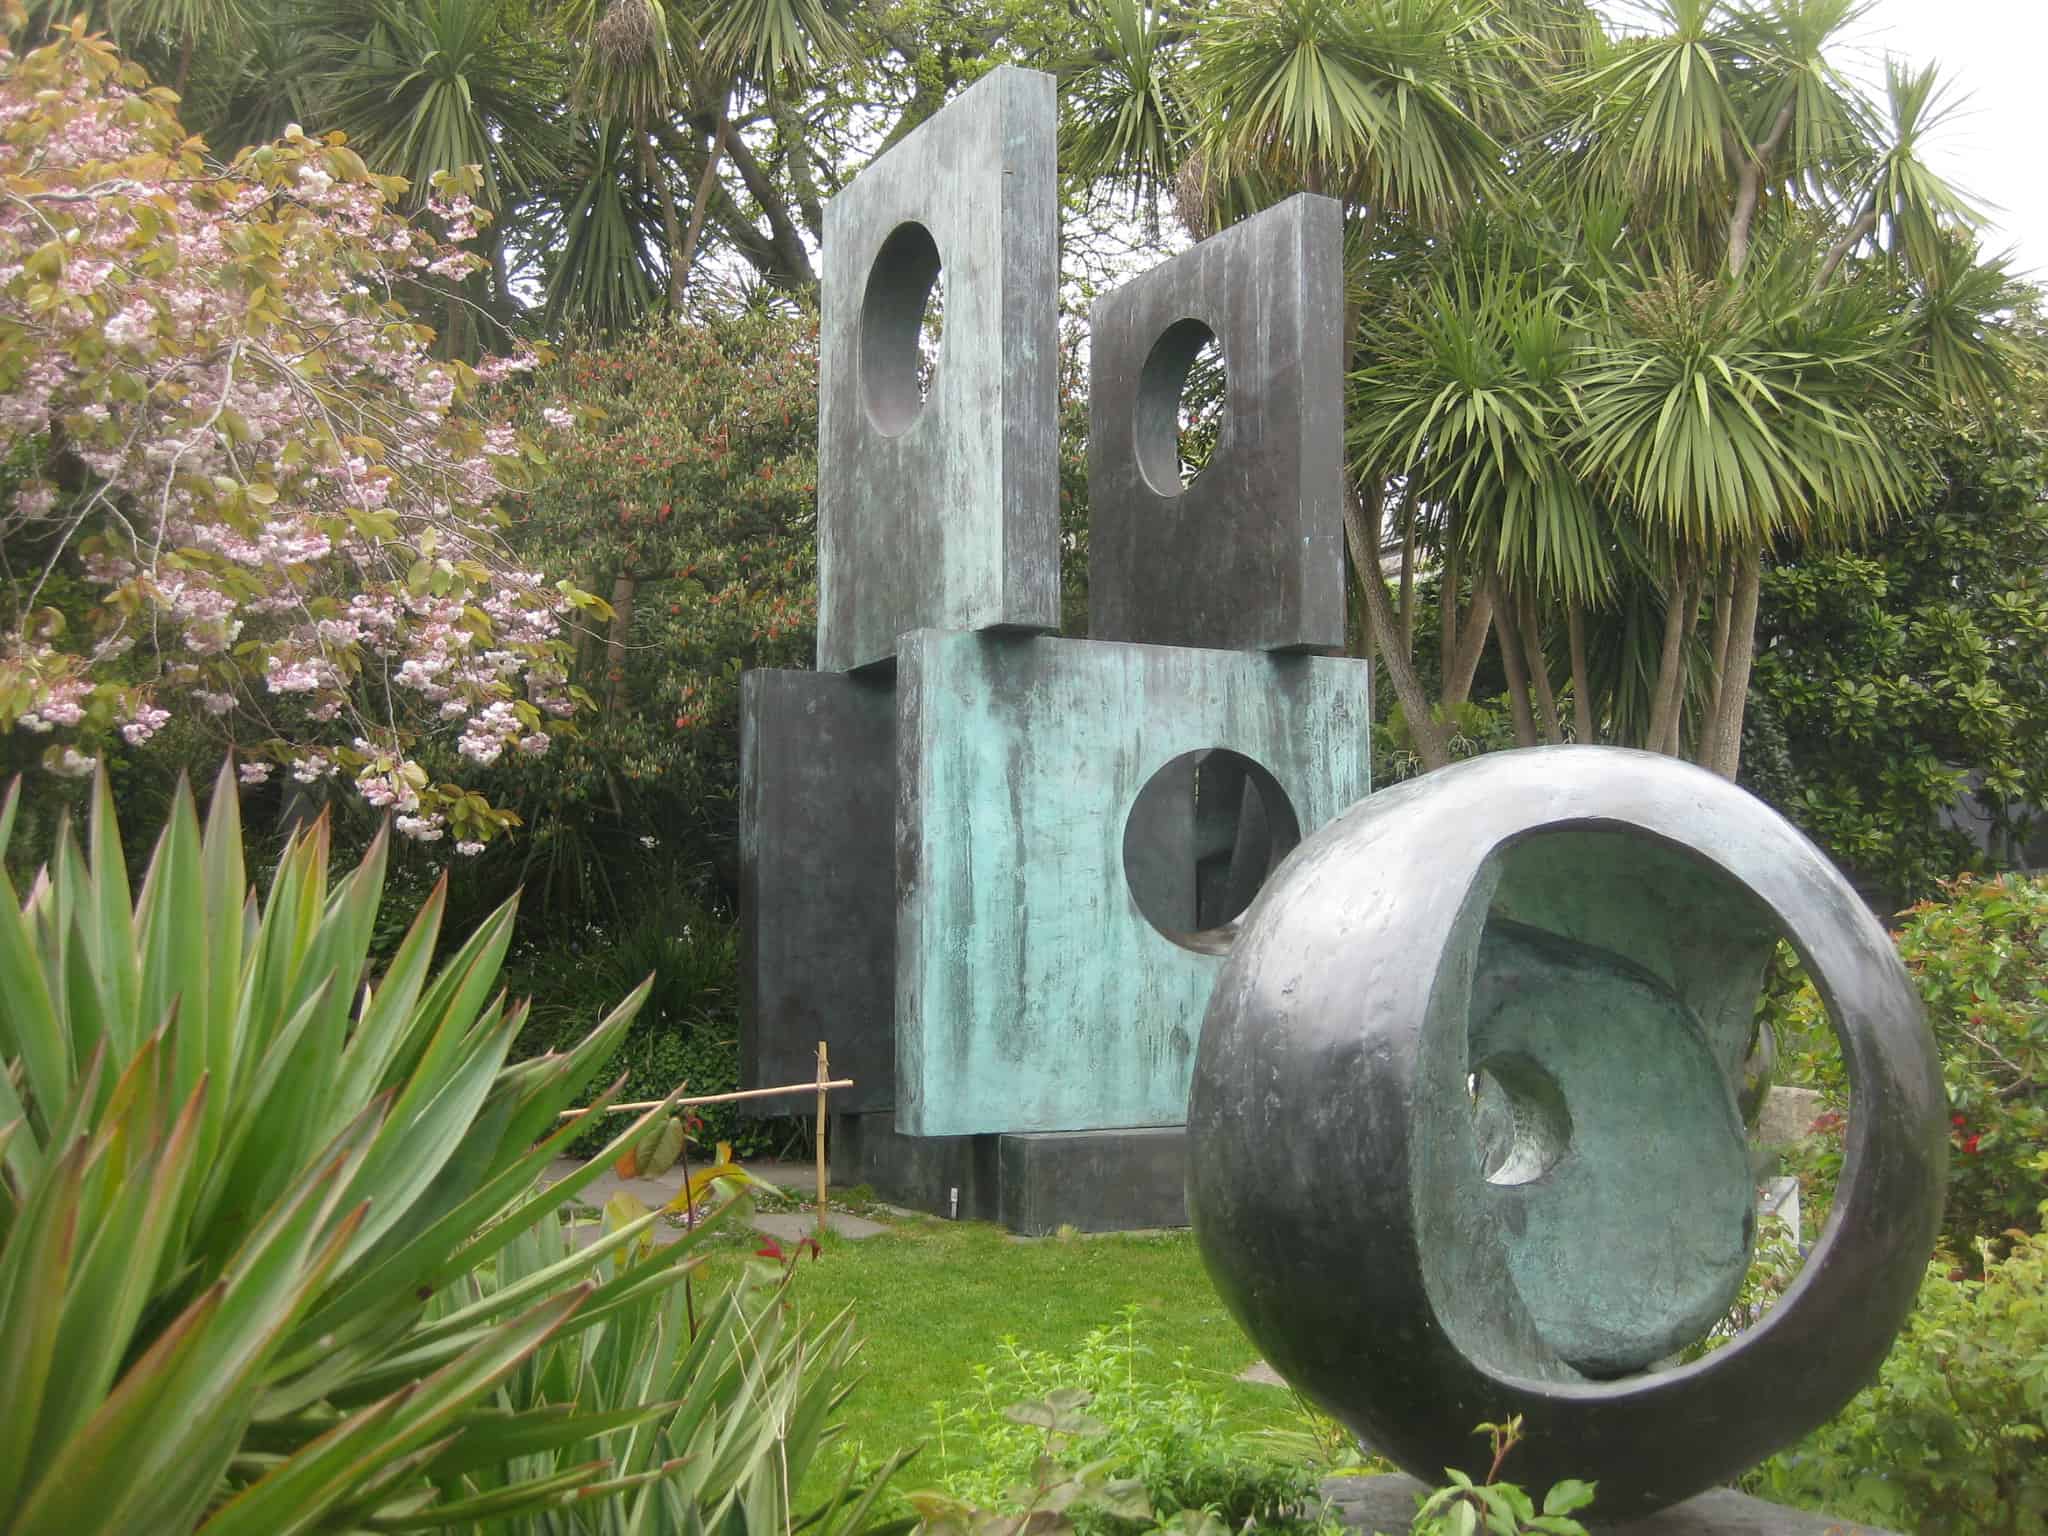 "Barbara Hepworth Museum, St Ives" by Matt From London is licensed with CC BY 2.0.